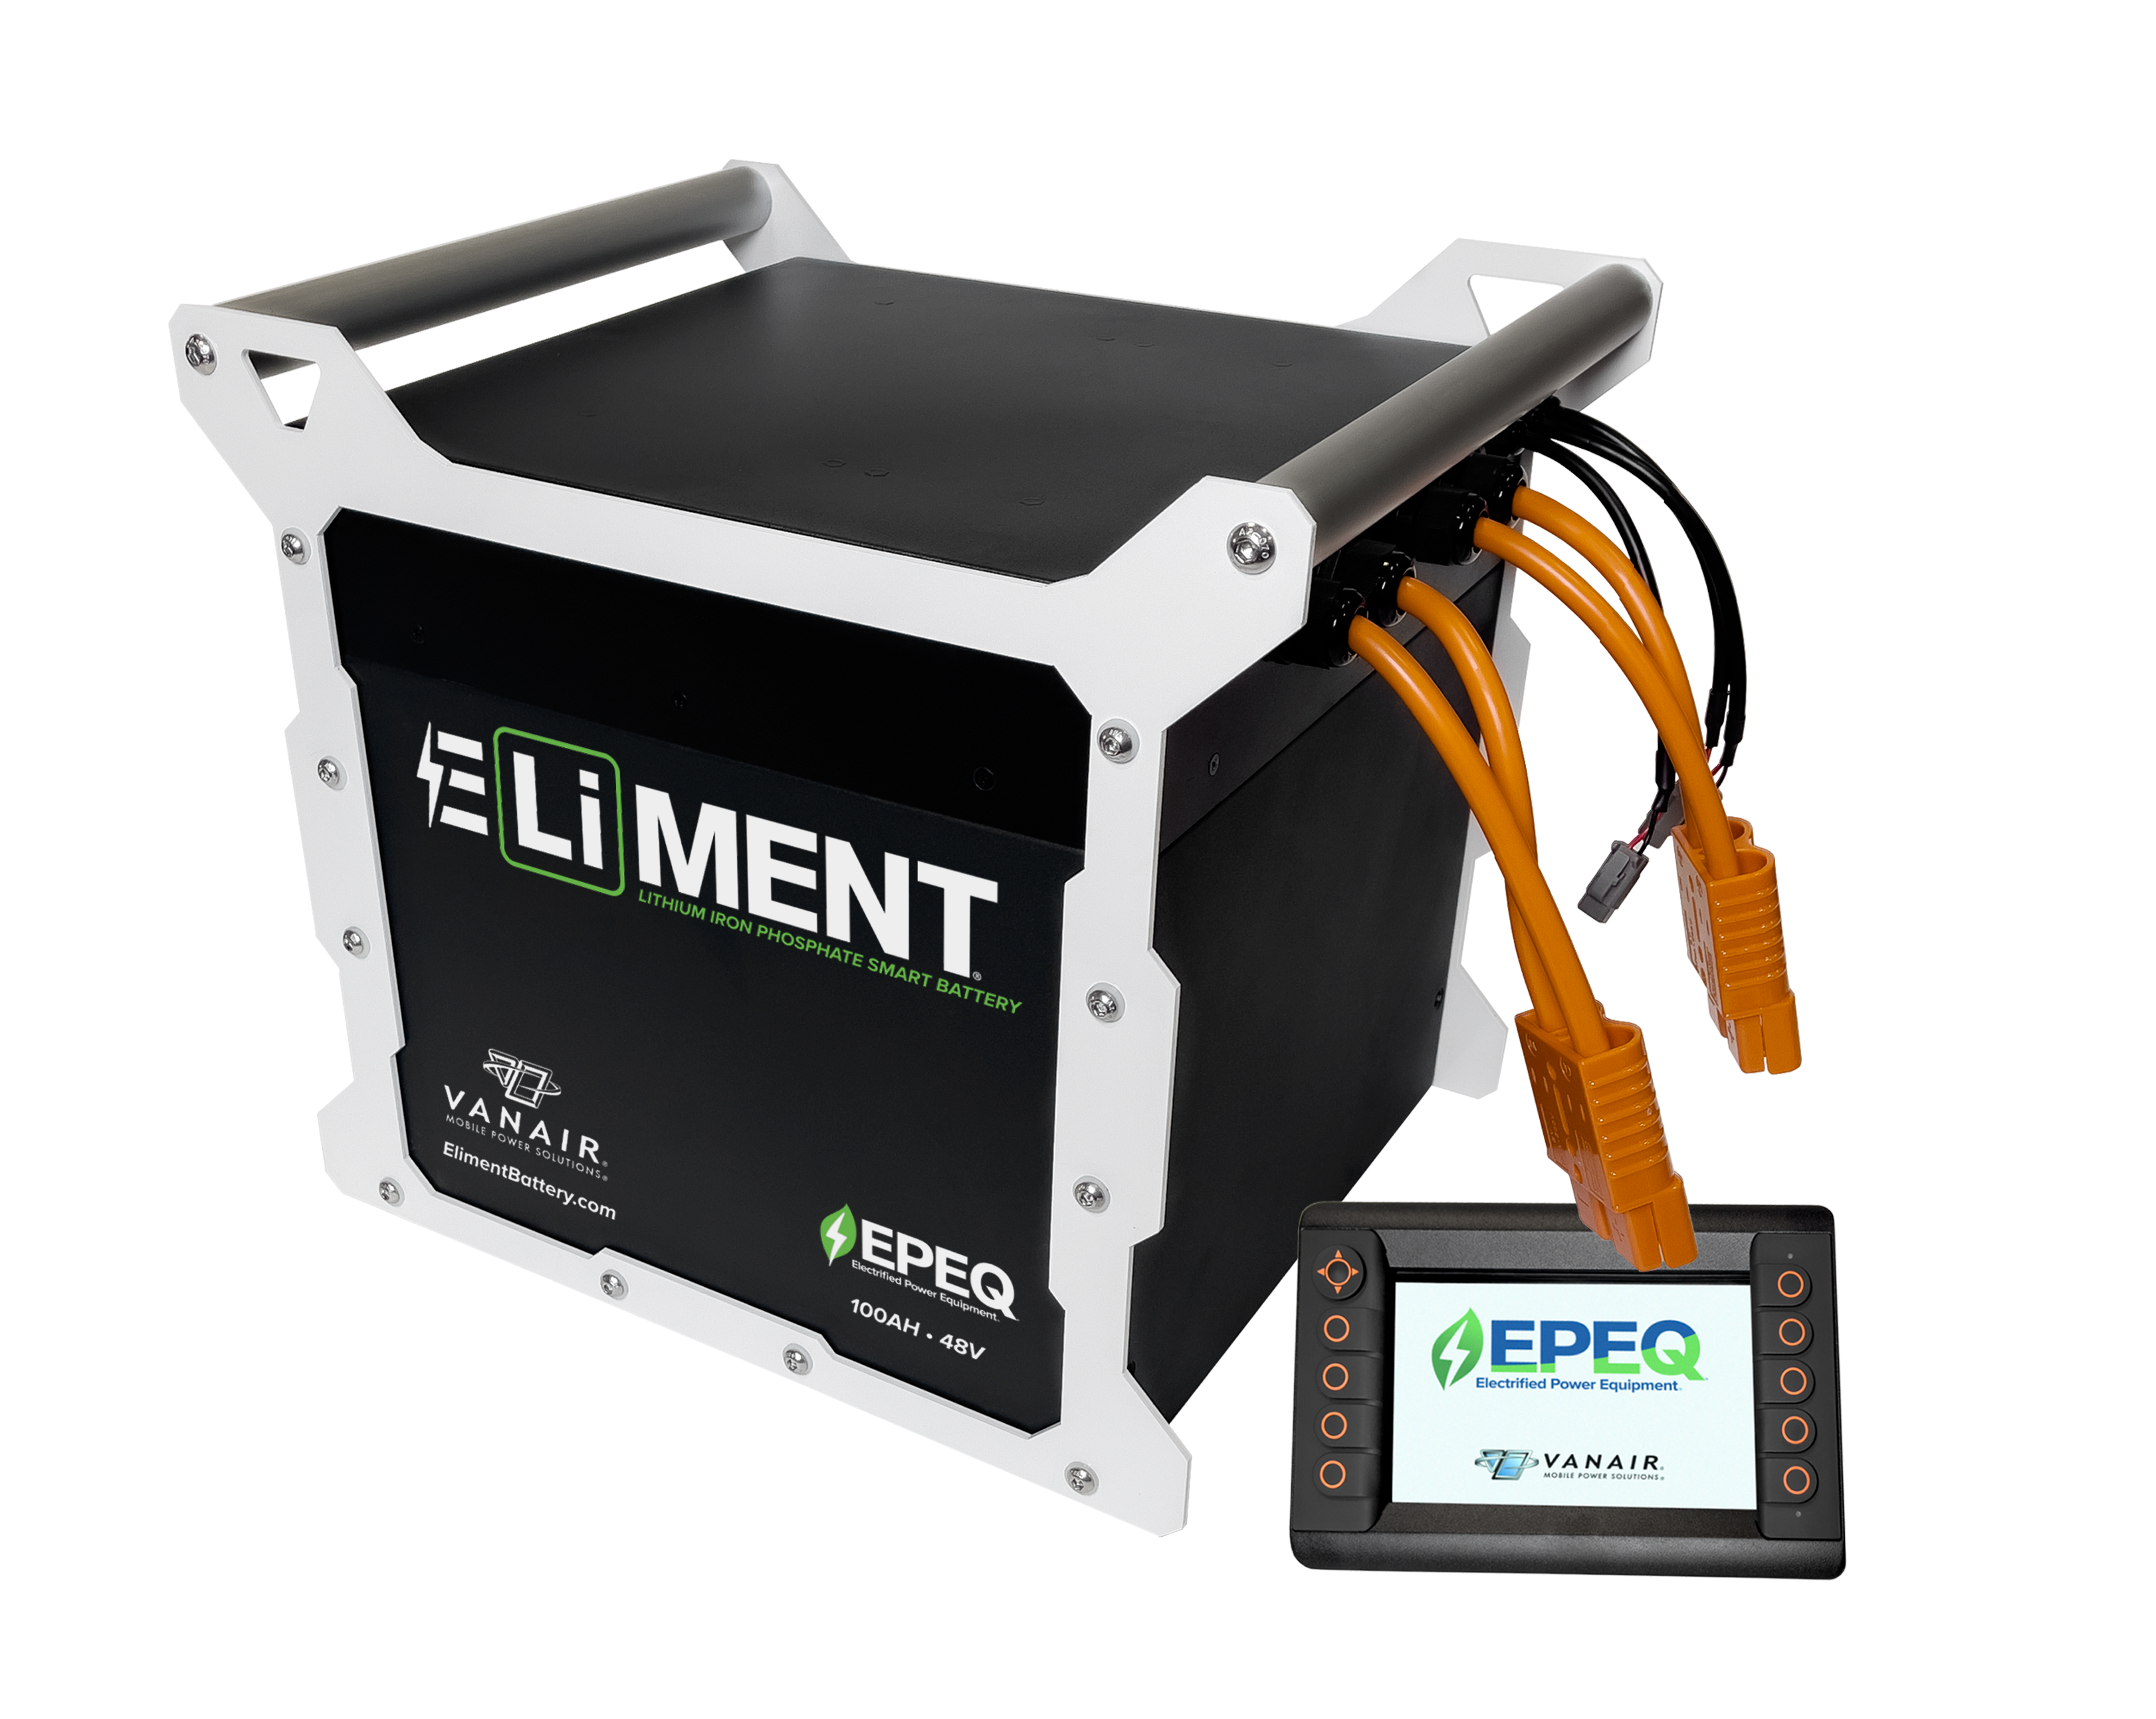 ELiMENT® LiFePO4 Battery and EPEQ® Smart Display